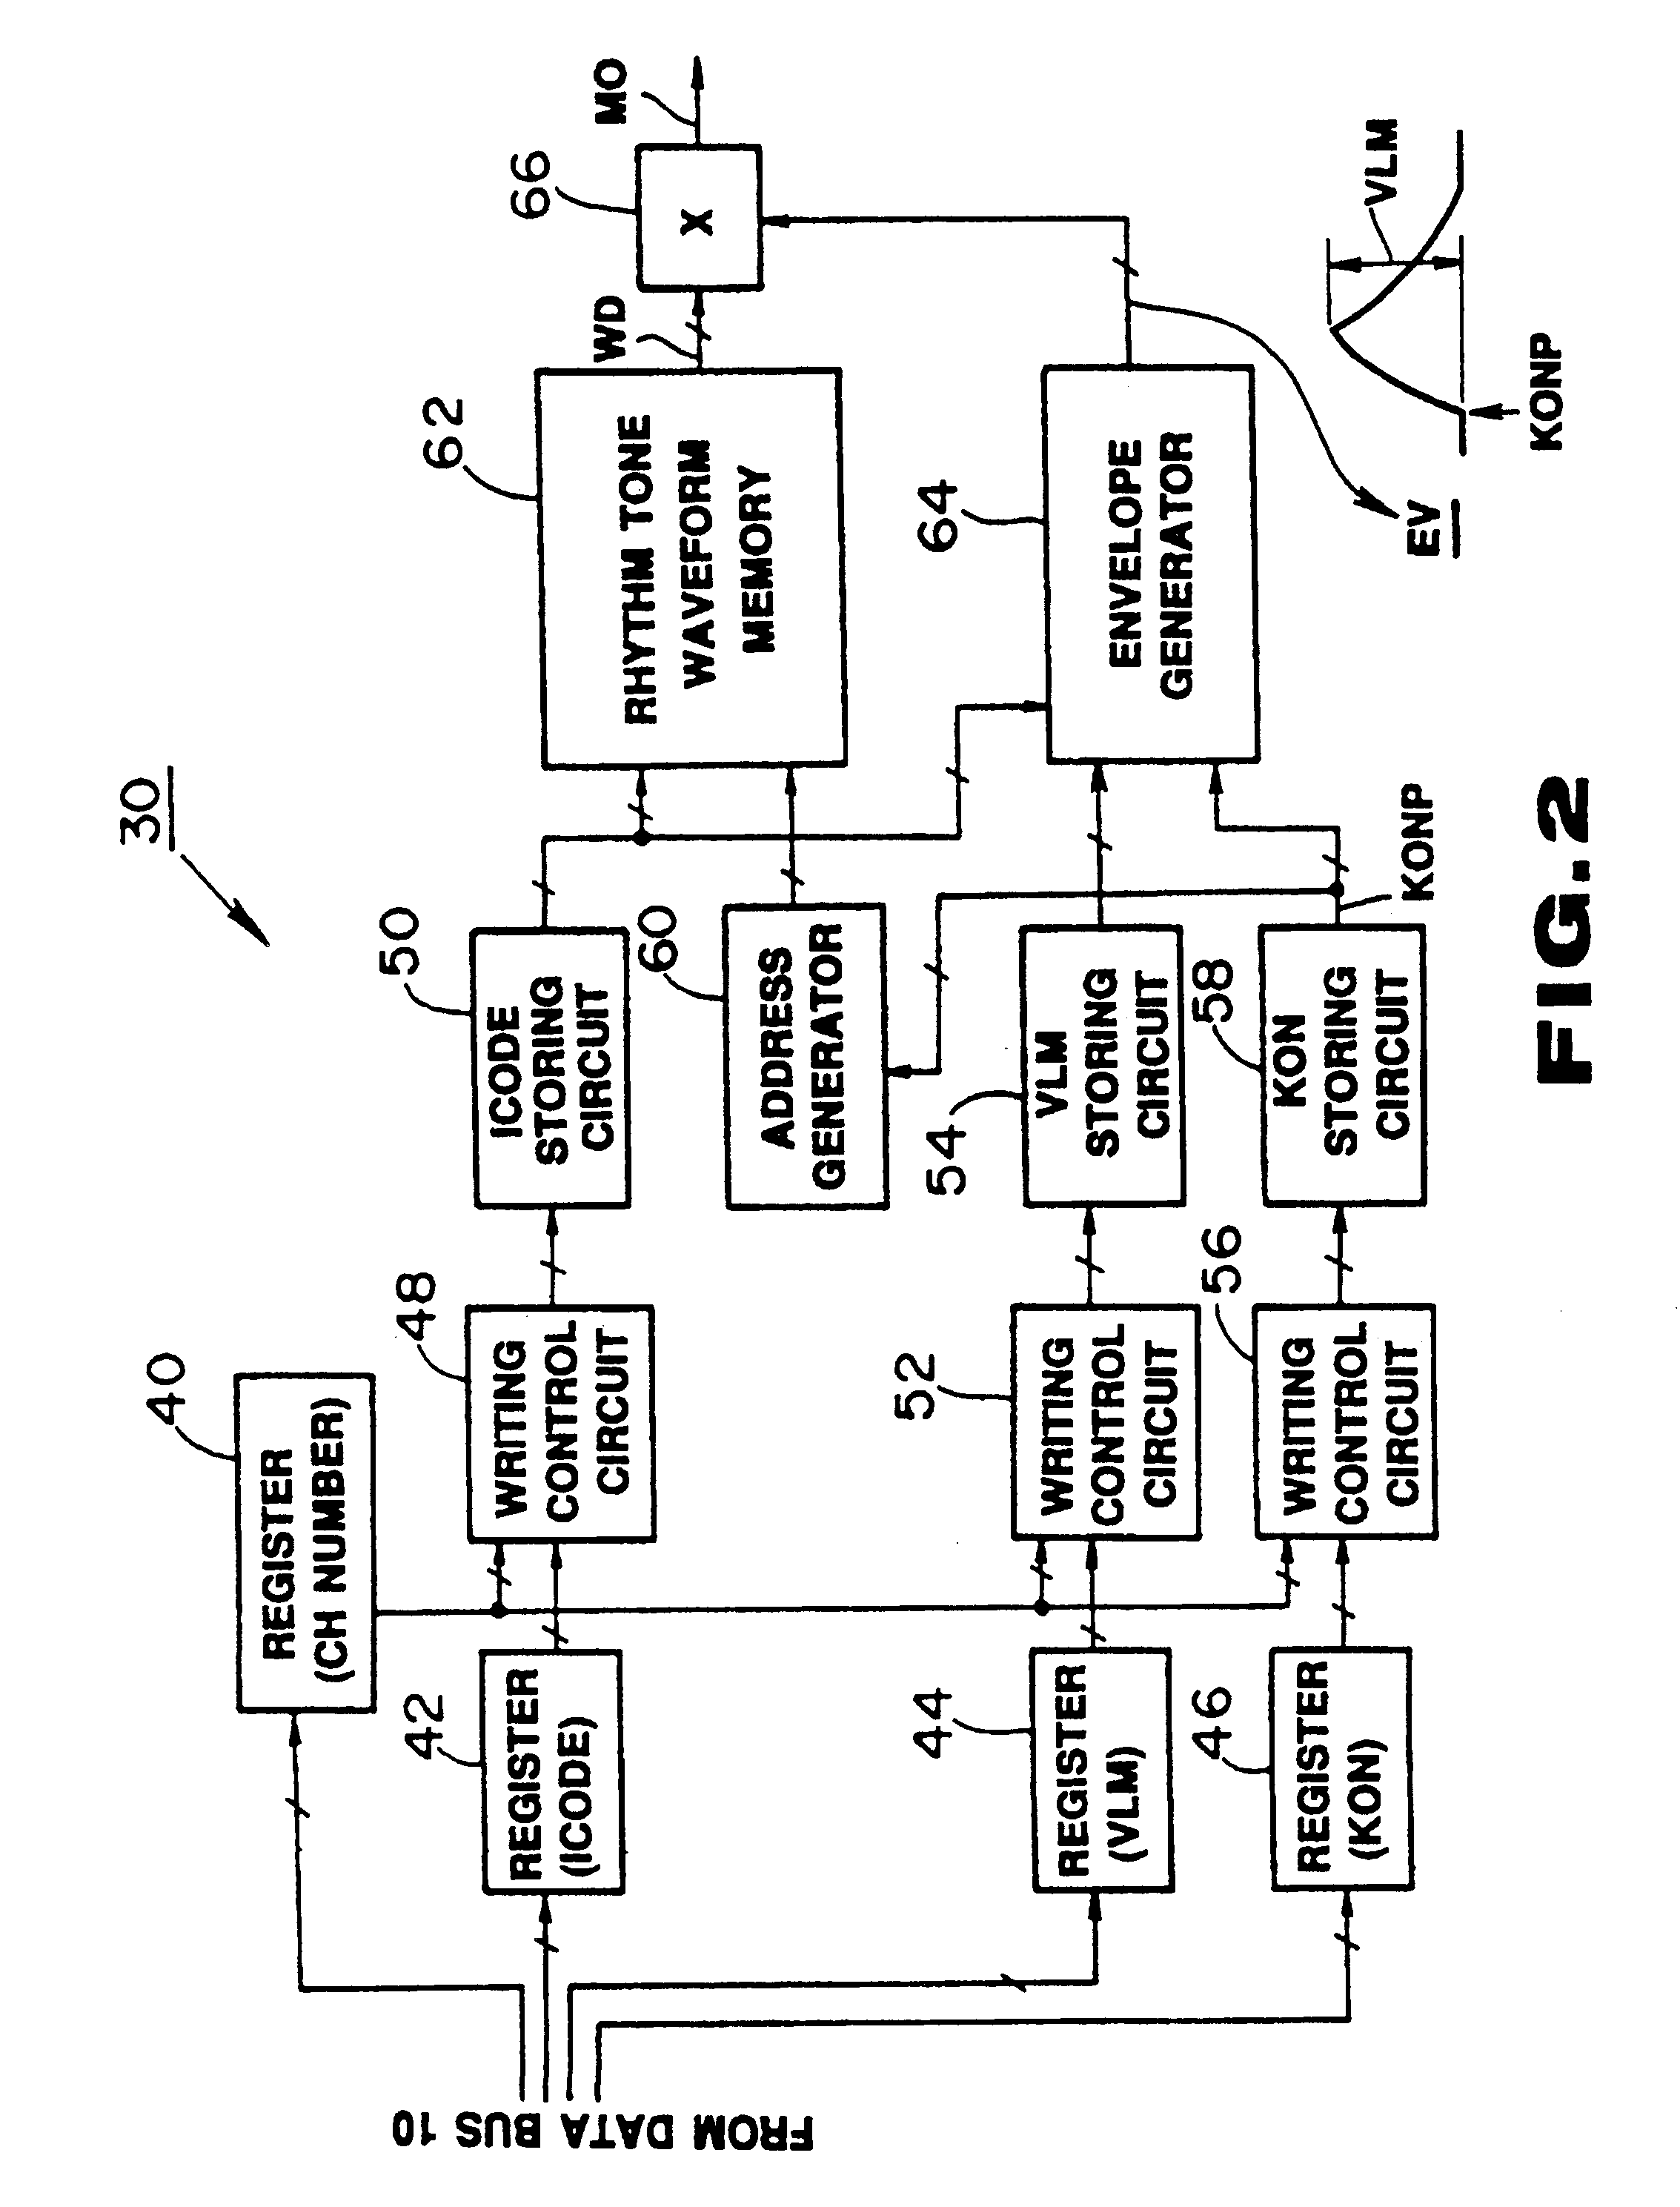 Electronic musical instrument having a ryhthm performance function